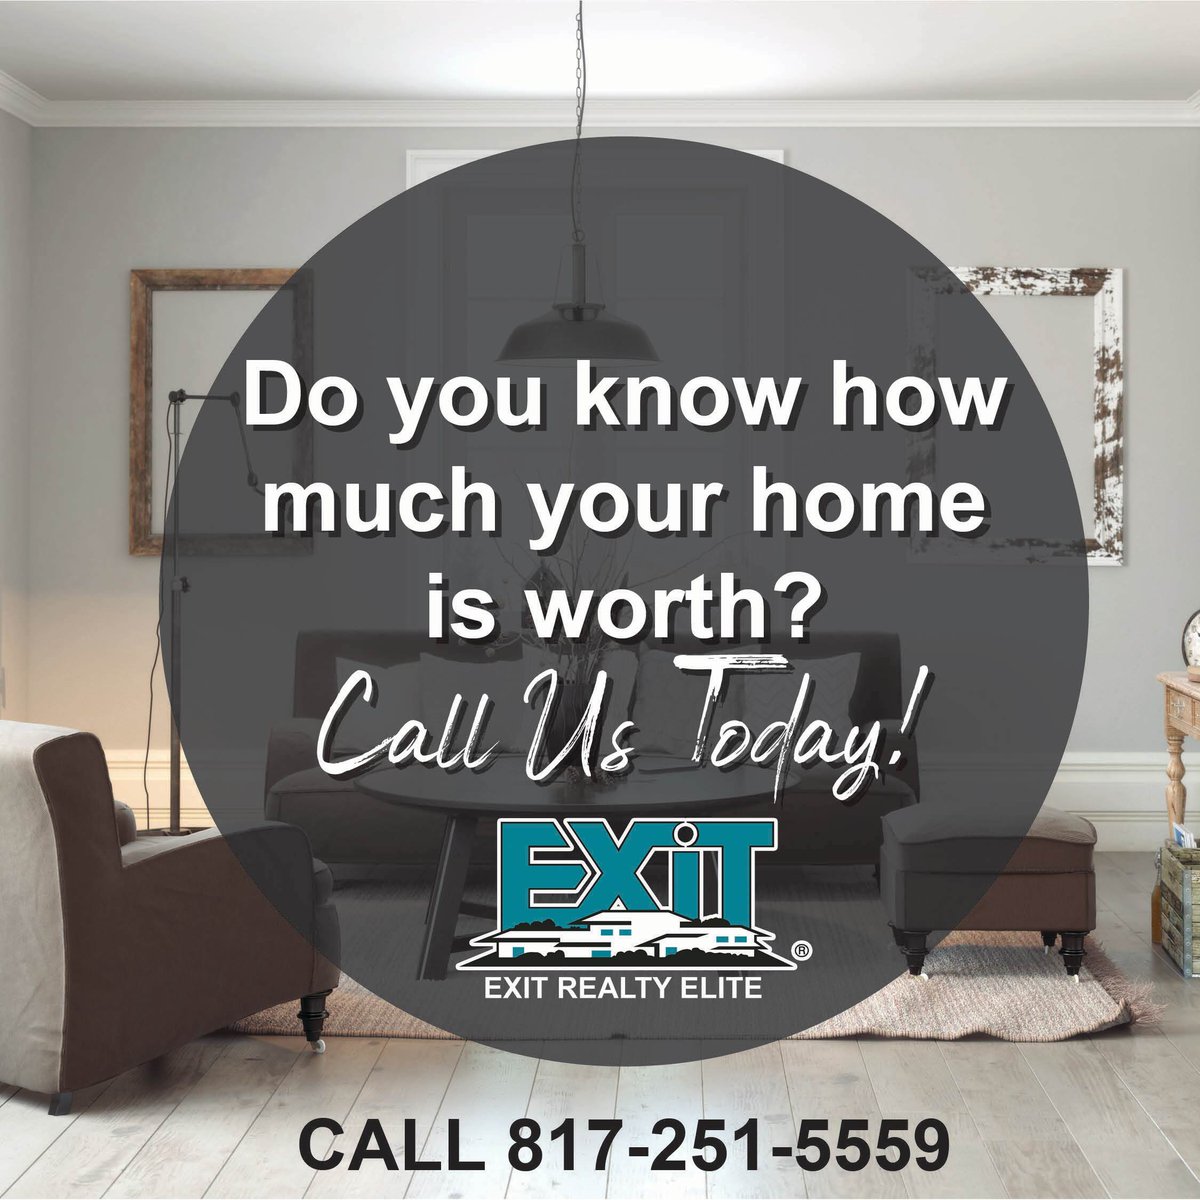 Do you know how much your home is worth?
We've got the answer!

#LOVEXIT #ImSold #ThinkSmartThinkEXIT #RealEstateReinvented #ListwithEXIT #DFWMetroplex #buyahome #sellahome #EXITRealtyElite #RealEstateCareers #TexasRealEstate